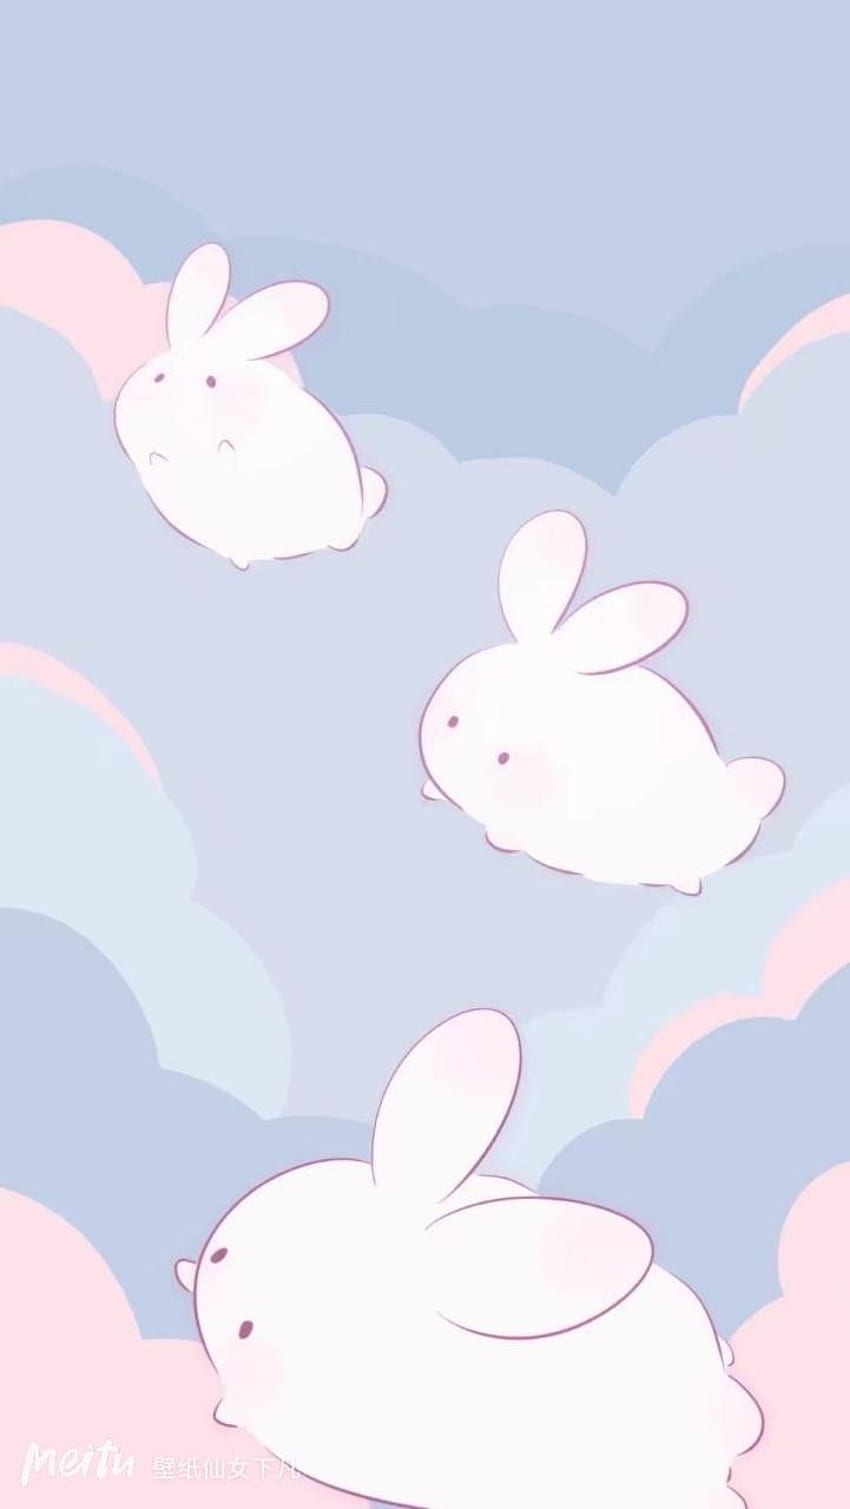 Download Get Ready for Spring with a Cute Bunny Iphone Wallpaper   Wallpaperscom